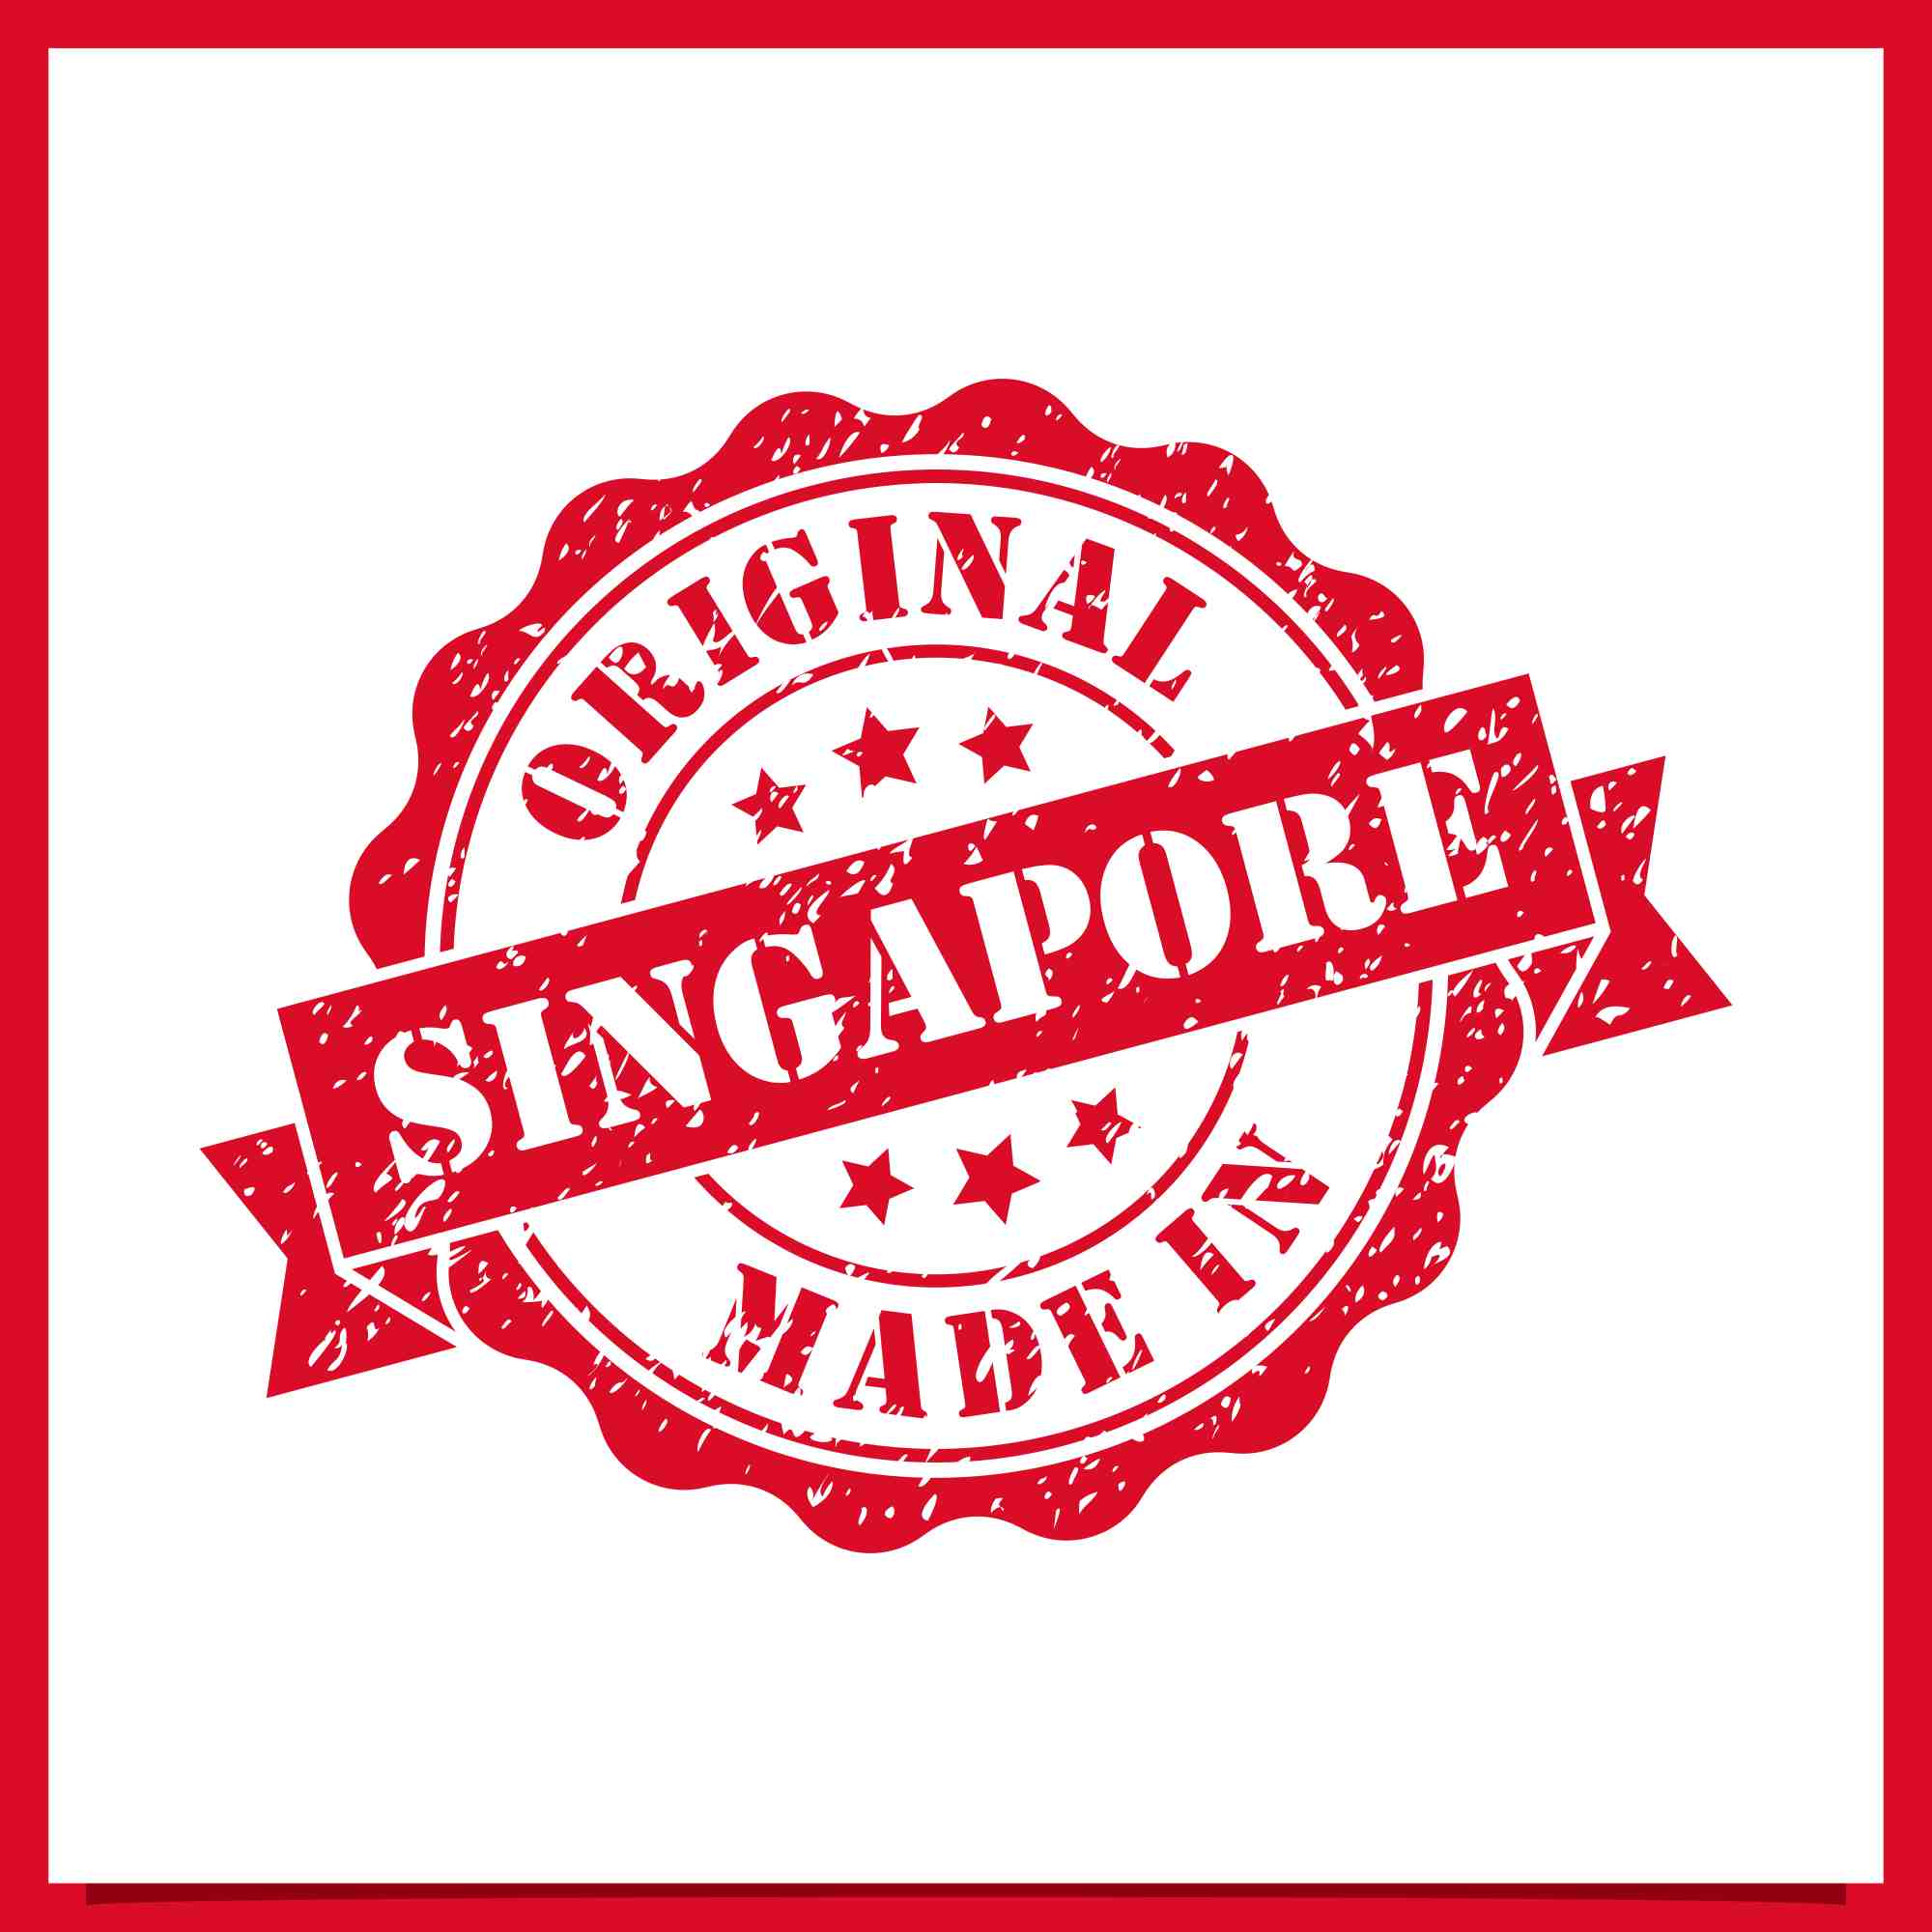 Welcome to Singapore stamps vector logo collection - $4 preview image.